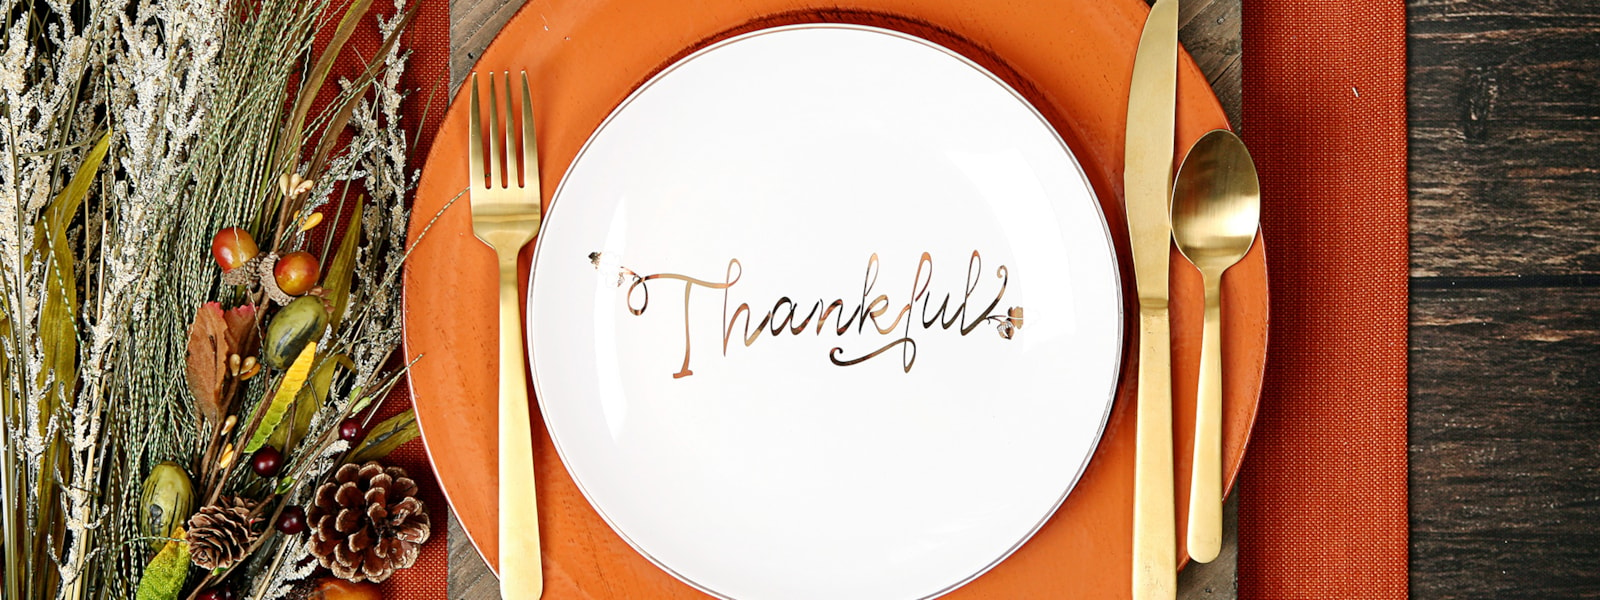 Table setting with the word Thankful